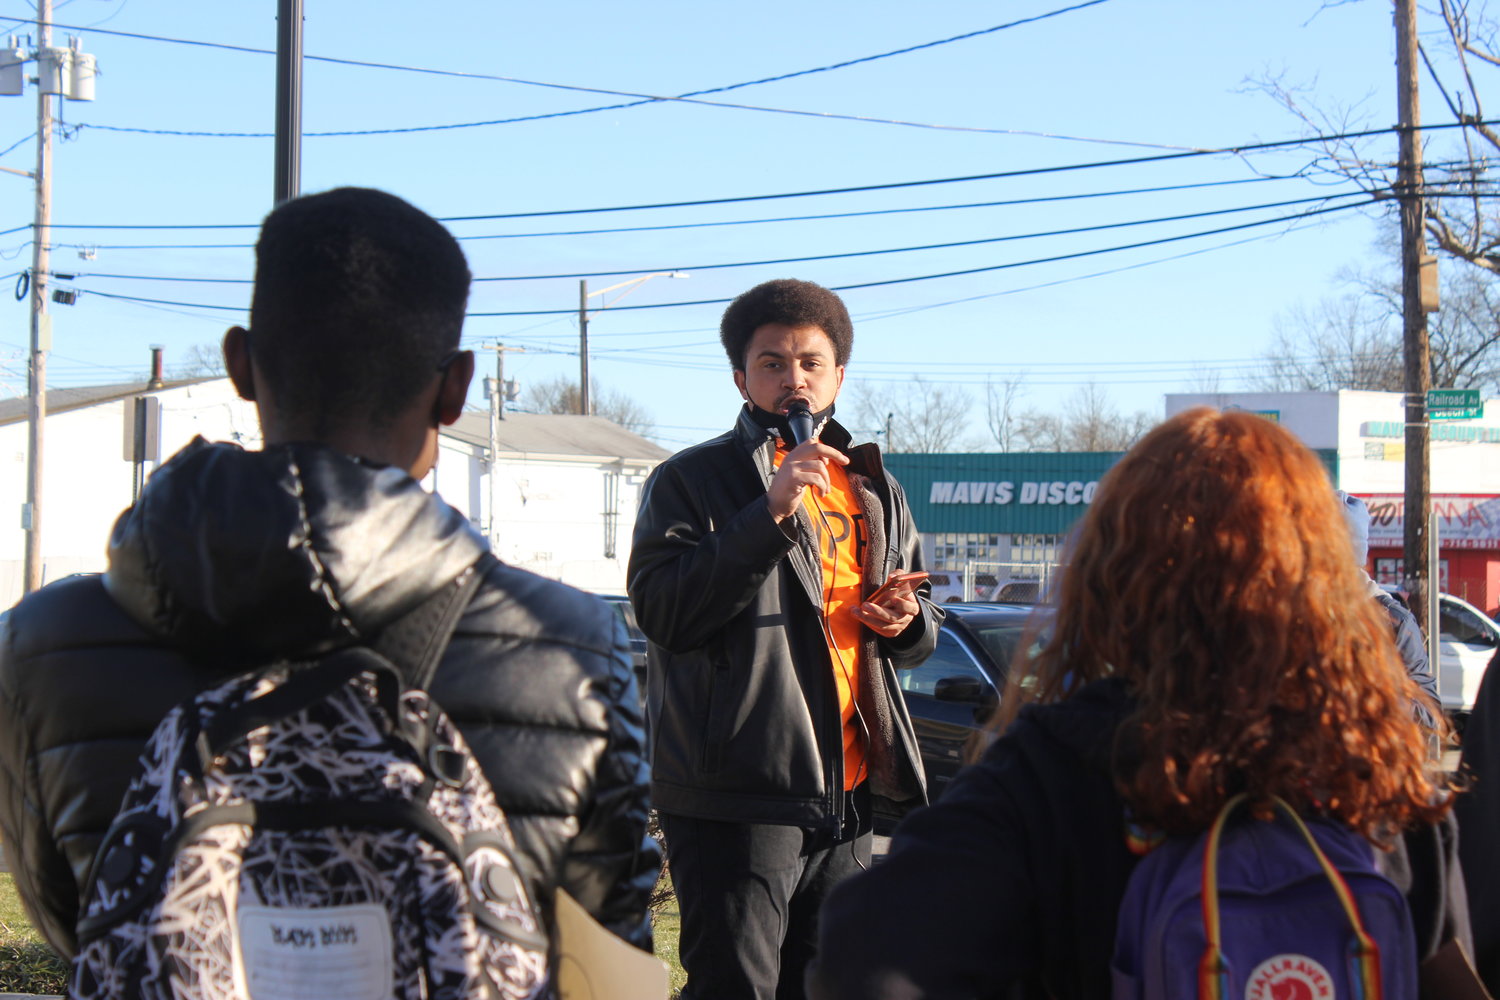 Black Lives Matter protesters gathered at the Wantagh Long Island Rail Road station last Saturday in response to the violence at the U.S. Capitol on Jan. 6. Terrel Tuosto, 28, of West Hempstead, addressed the group before they marched through Wantagh.